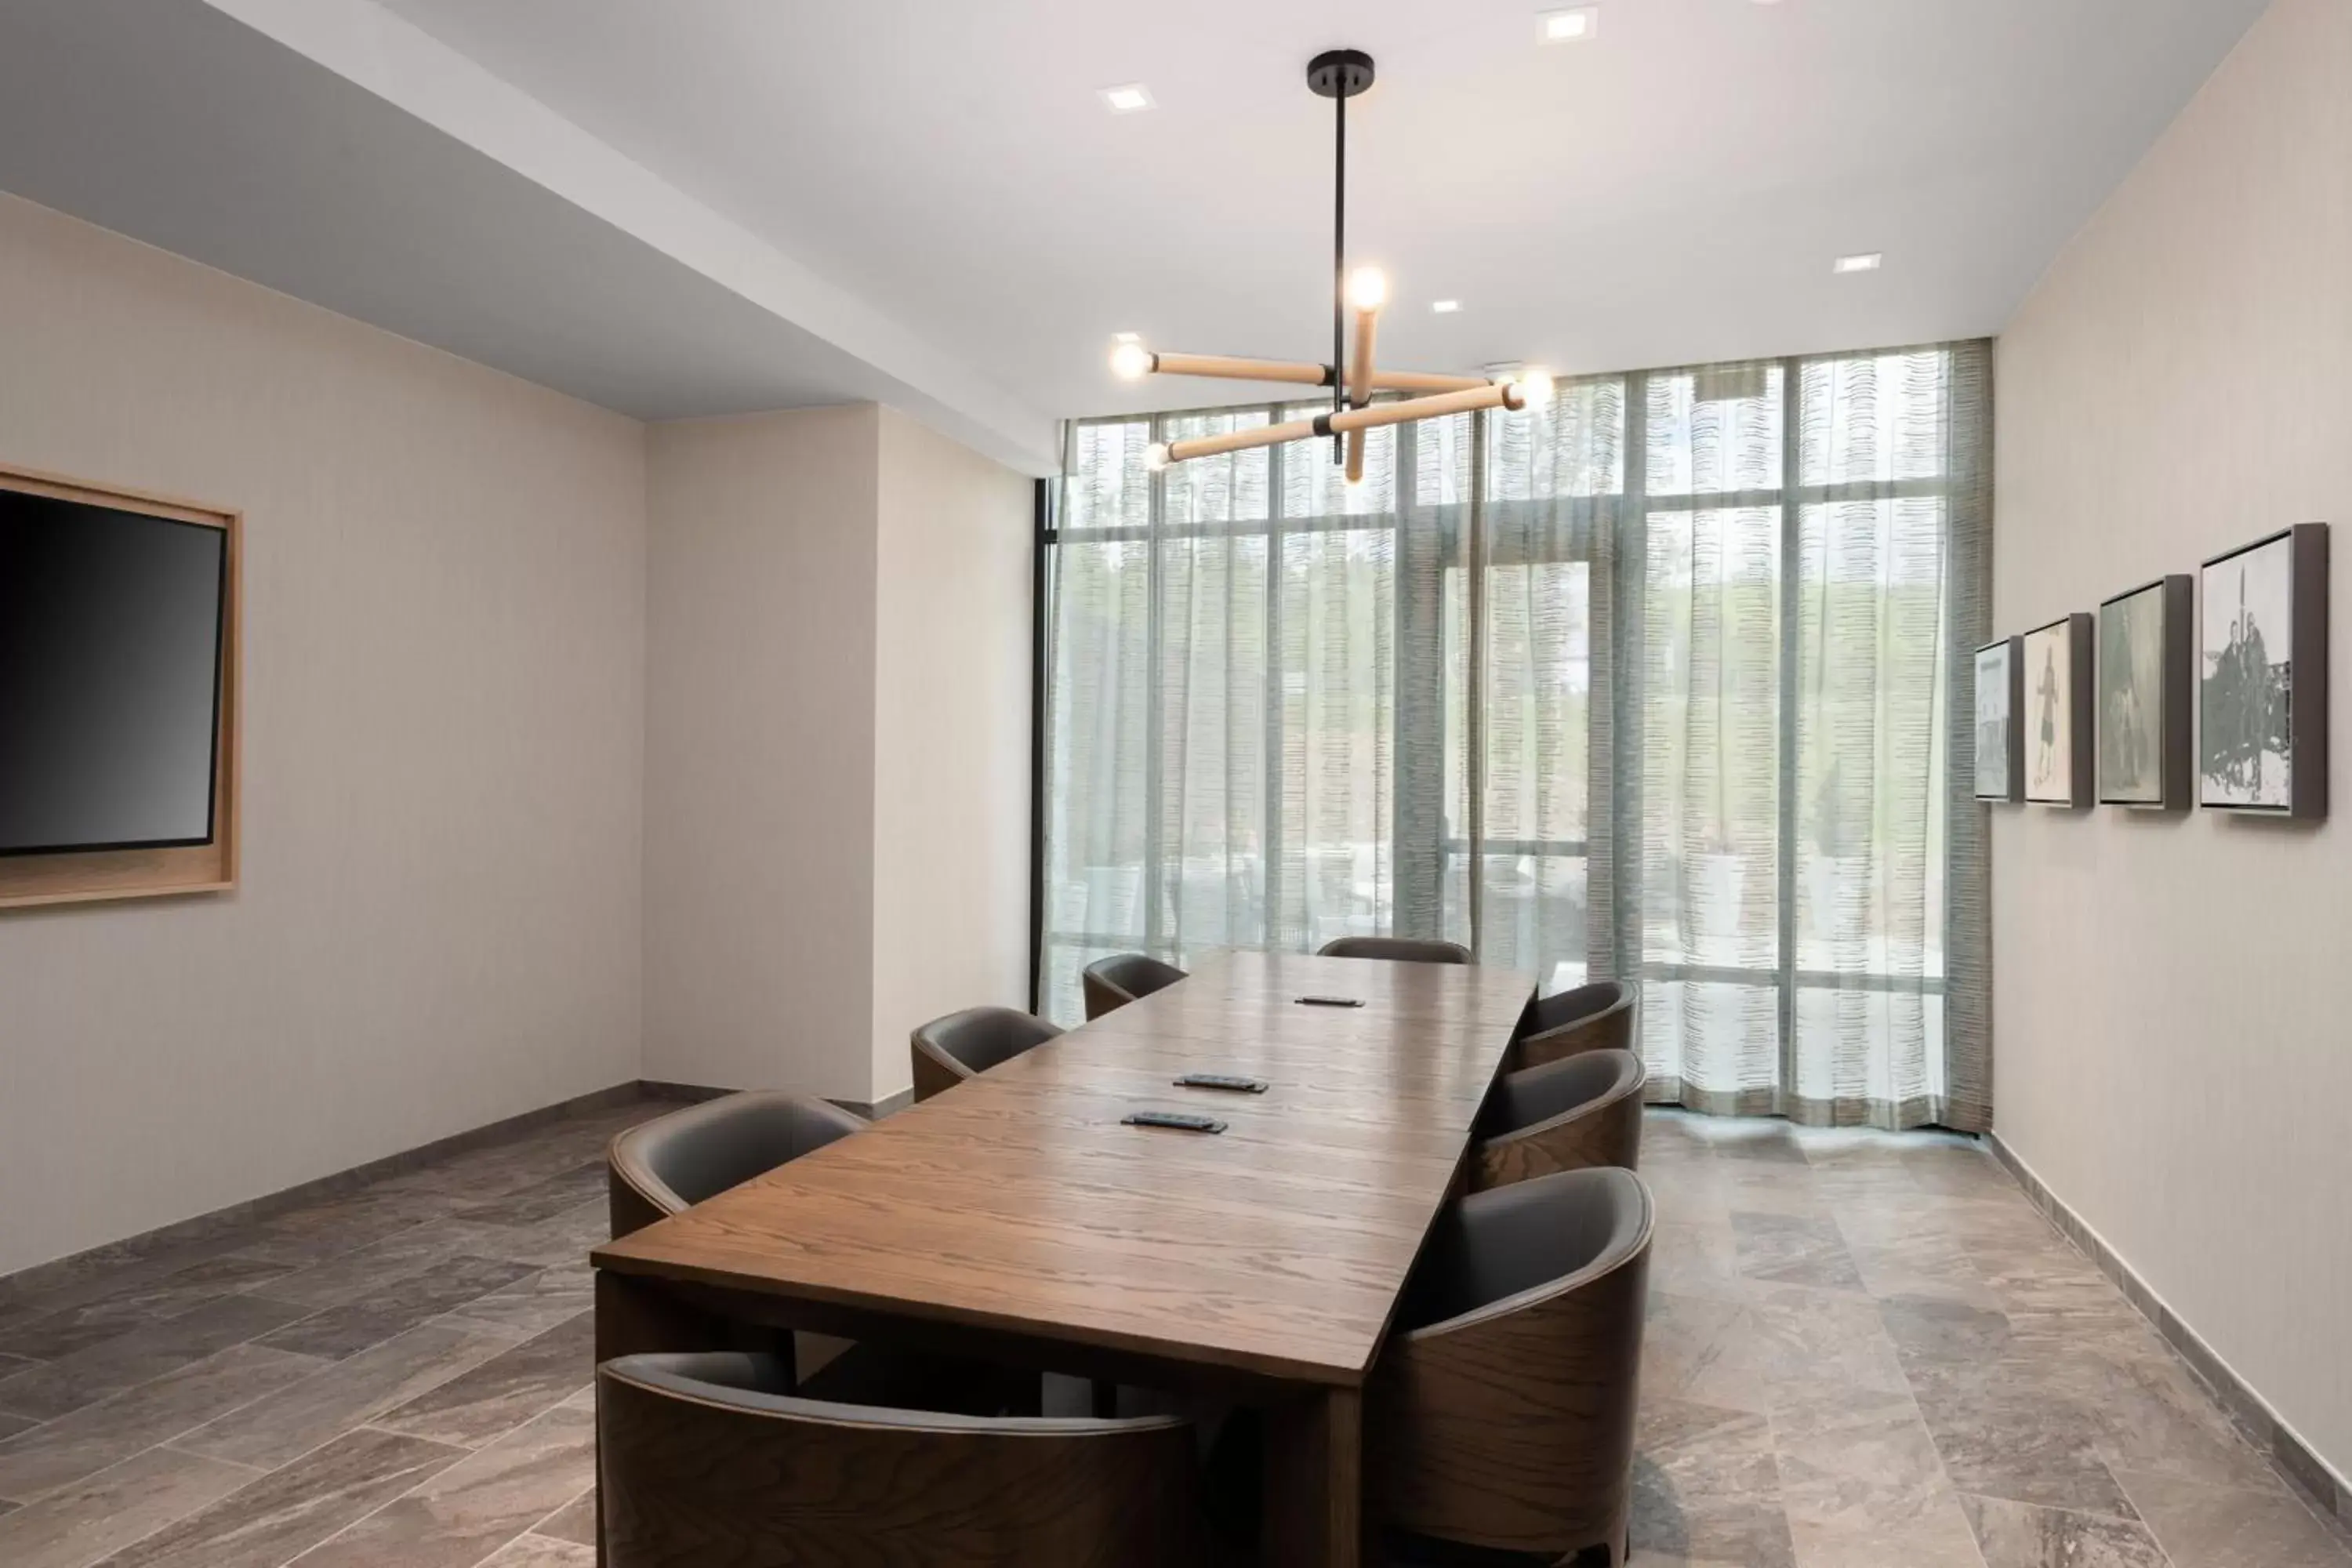 Meeting/conference room in AC Hotel by Marriott Frisco Colorado